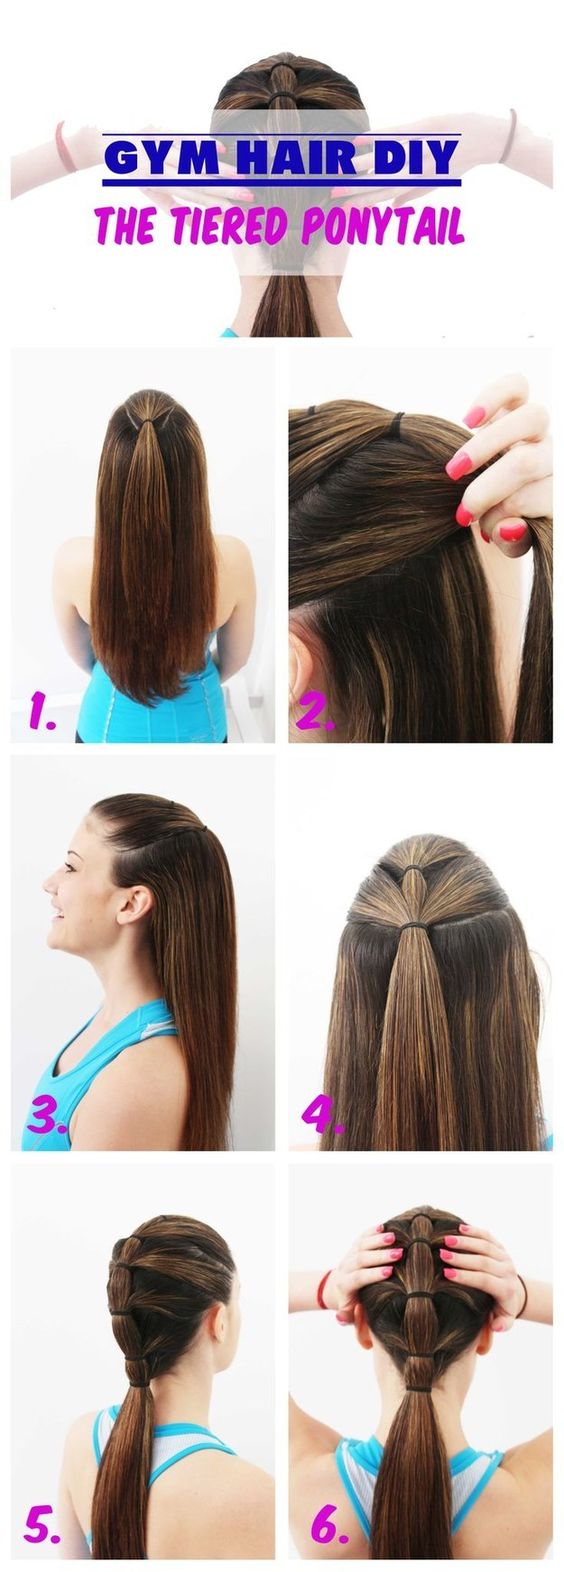 22 quick and easy back-to-school hairstyle tutorials